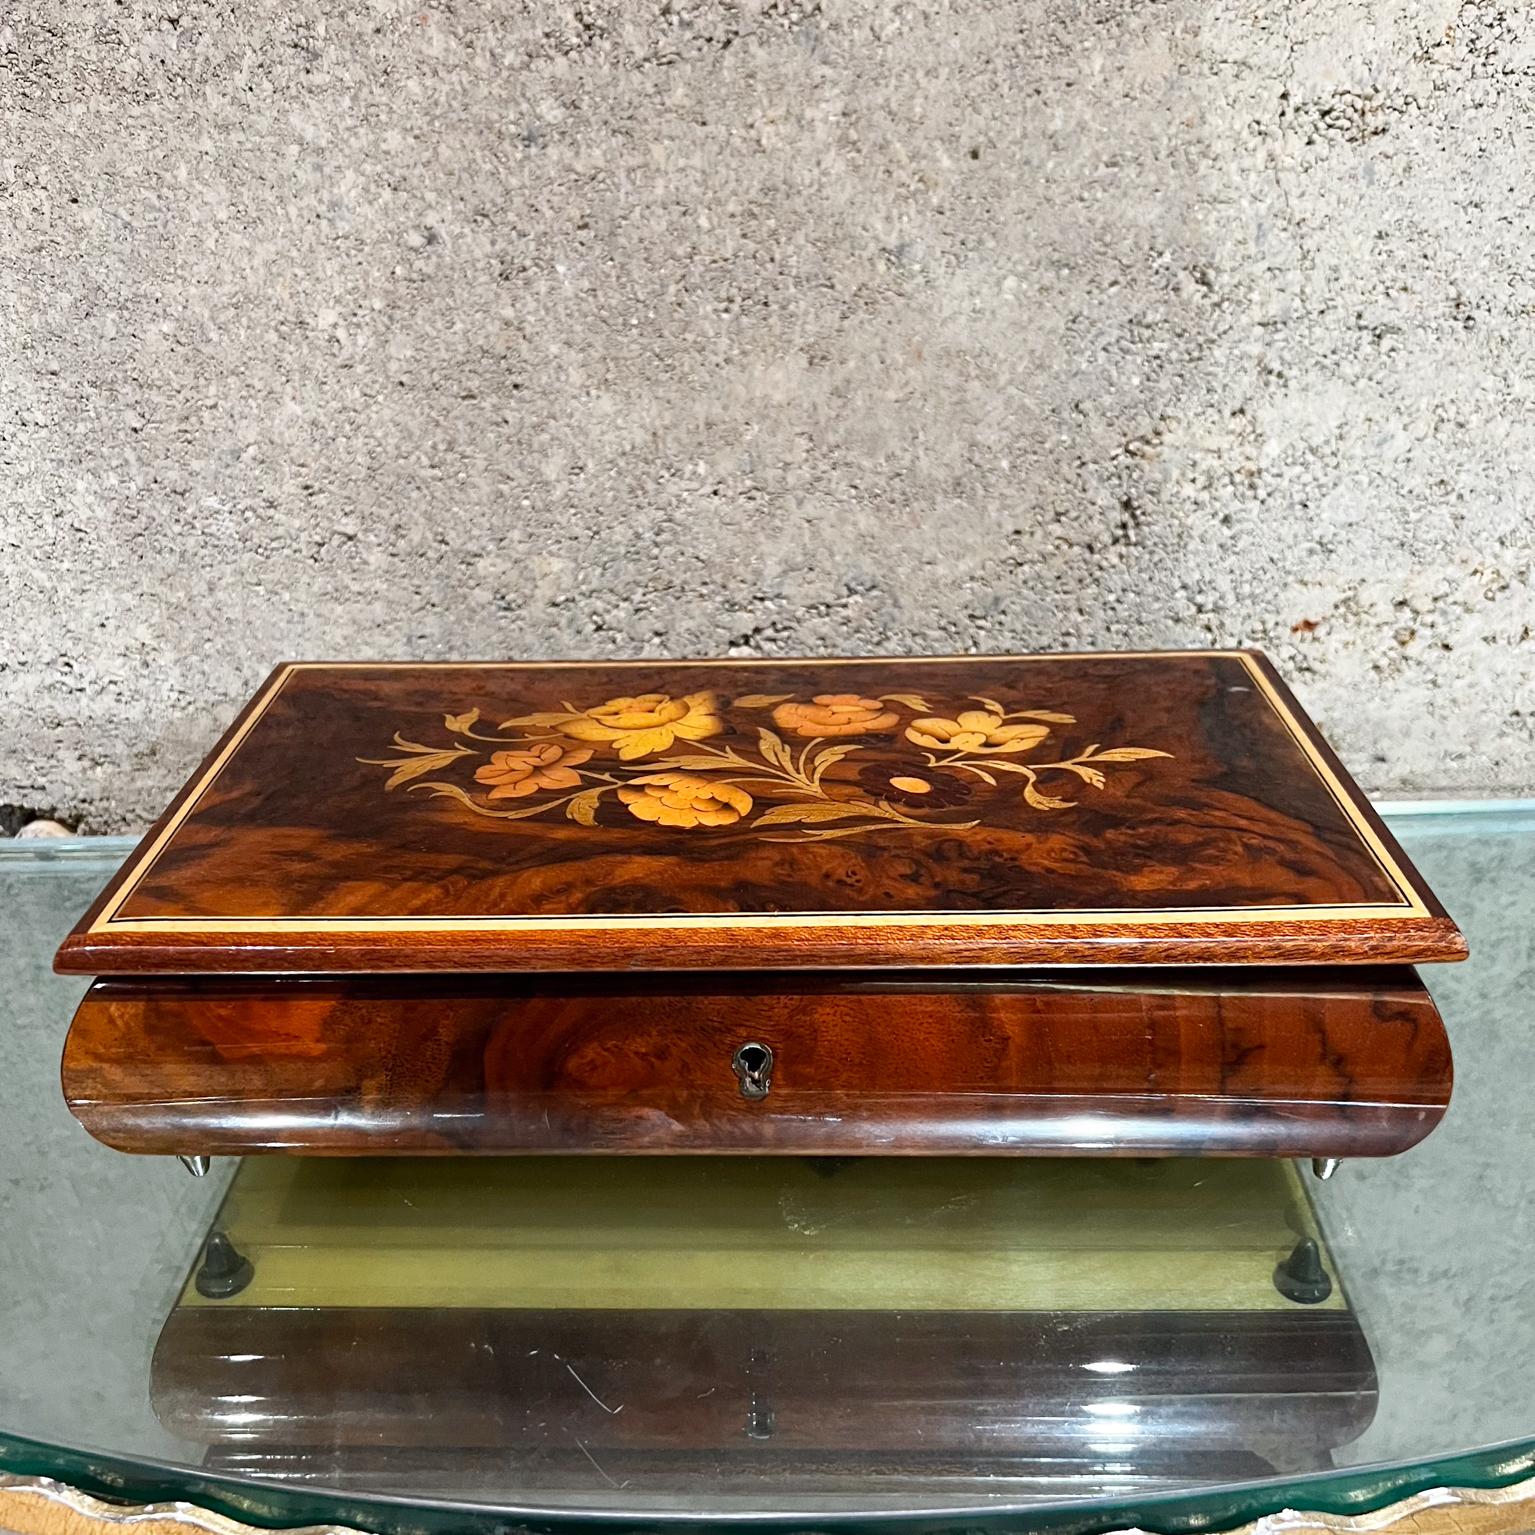 1970s Vintage Reuge Wood Music Box Italian inlaid marquetry jewelry box.
Elegant footed music box in and crafted fruitwood.
Glossy Enamel Finish.
Red velvet interior.
Reuge Ste Croix Demain Collection.
2.75 tall x 6 d x 10.75 w
New key to rewind and